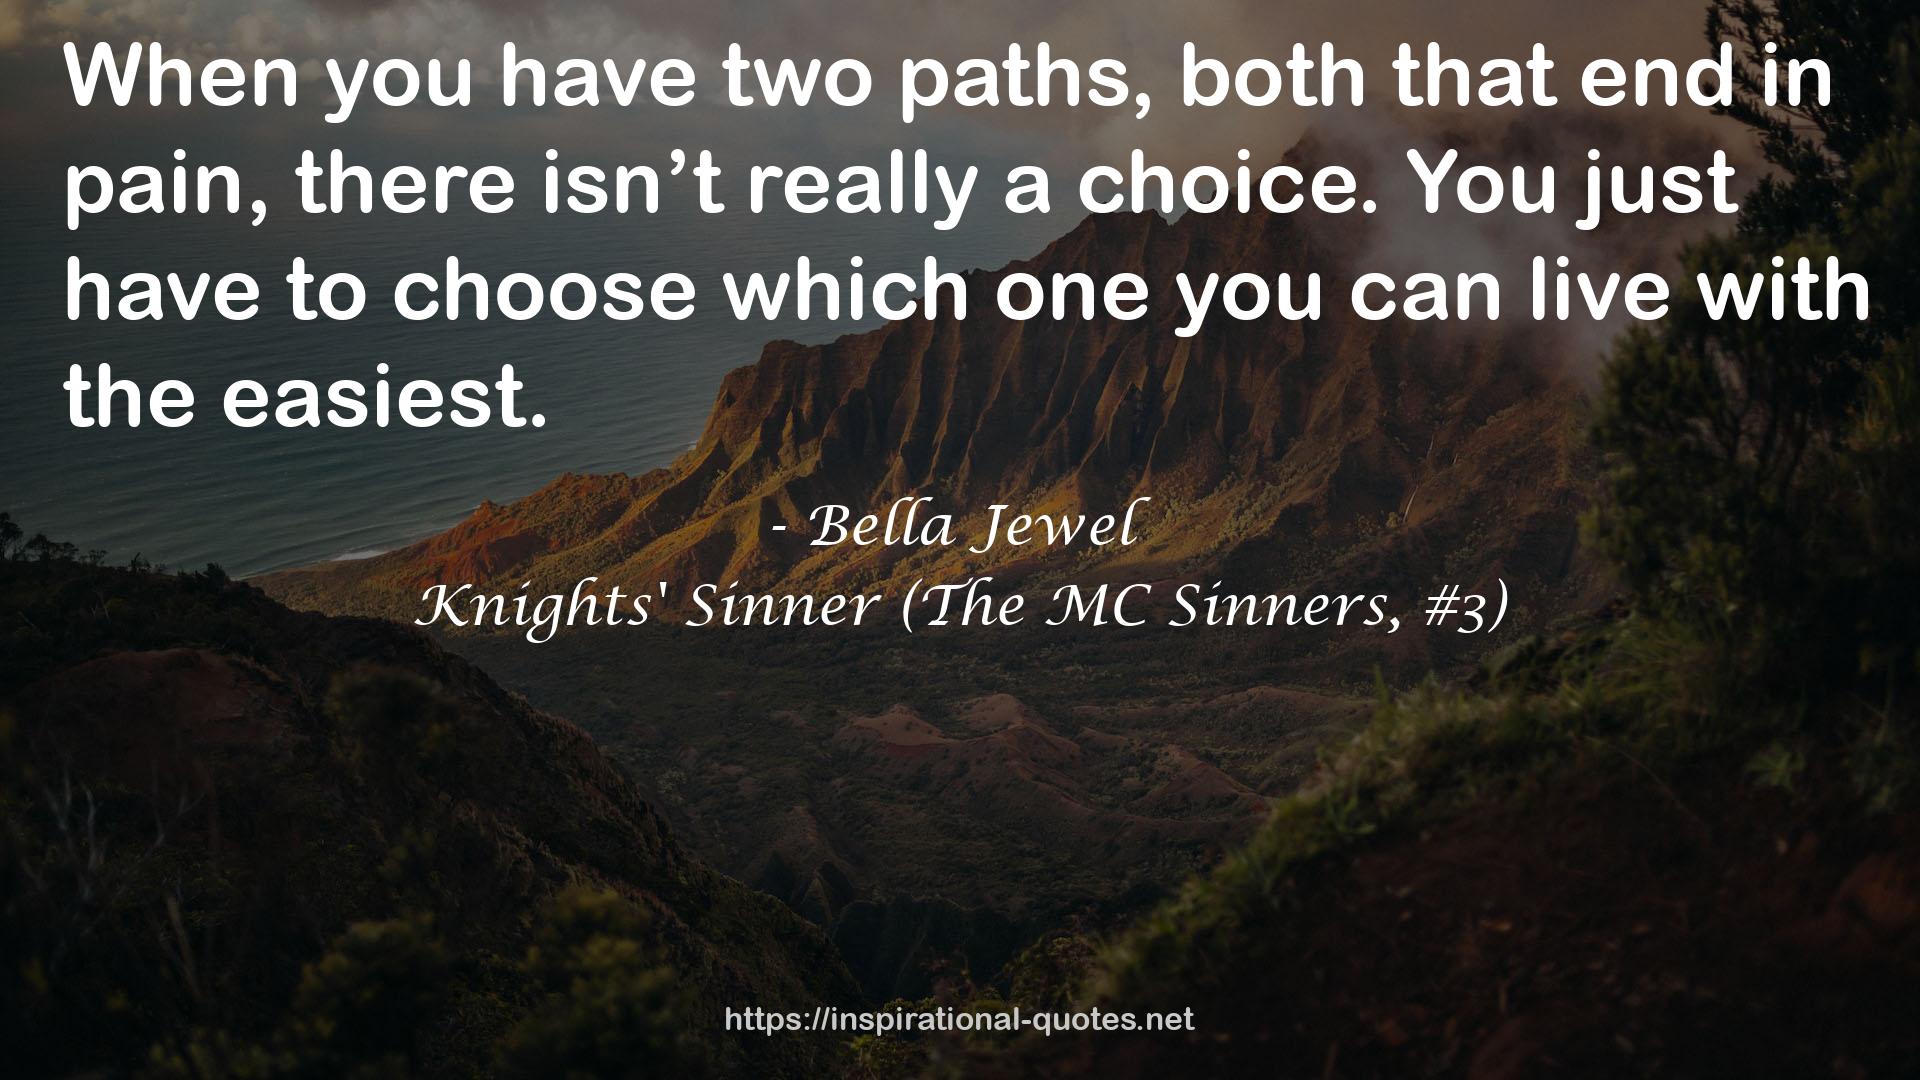 Knights' Sinner (The MC Sinners, #3) QUOTES